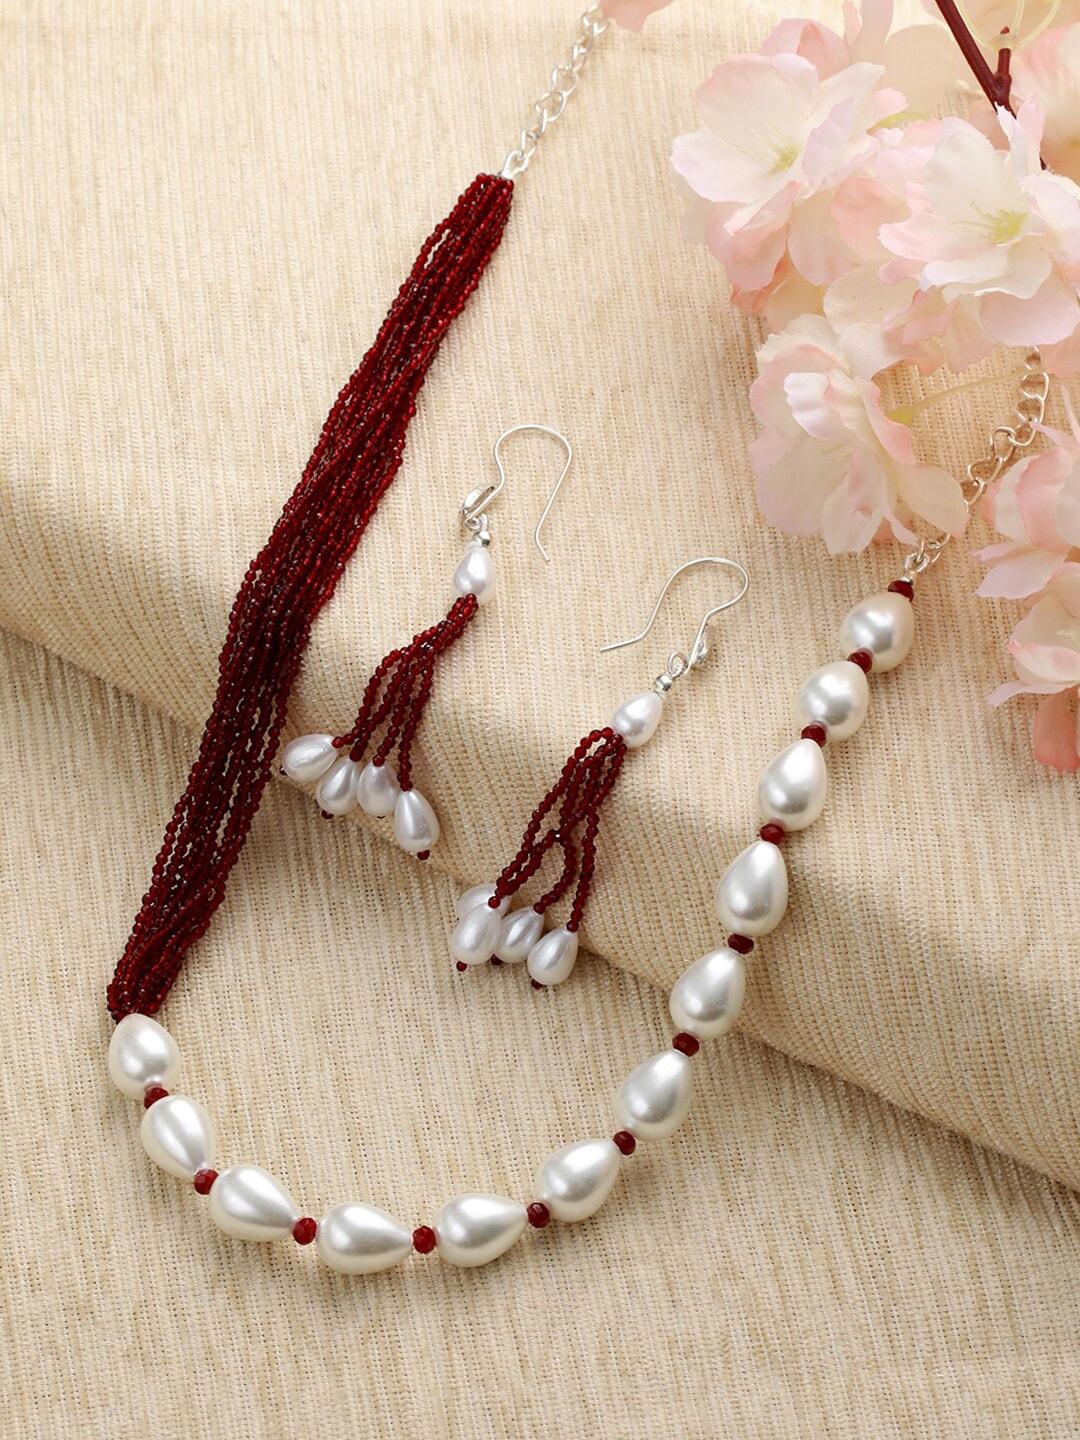 jazz and sizzle silver-plated beaded necklace and earrings